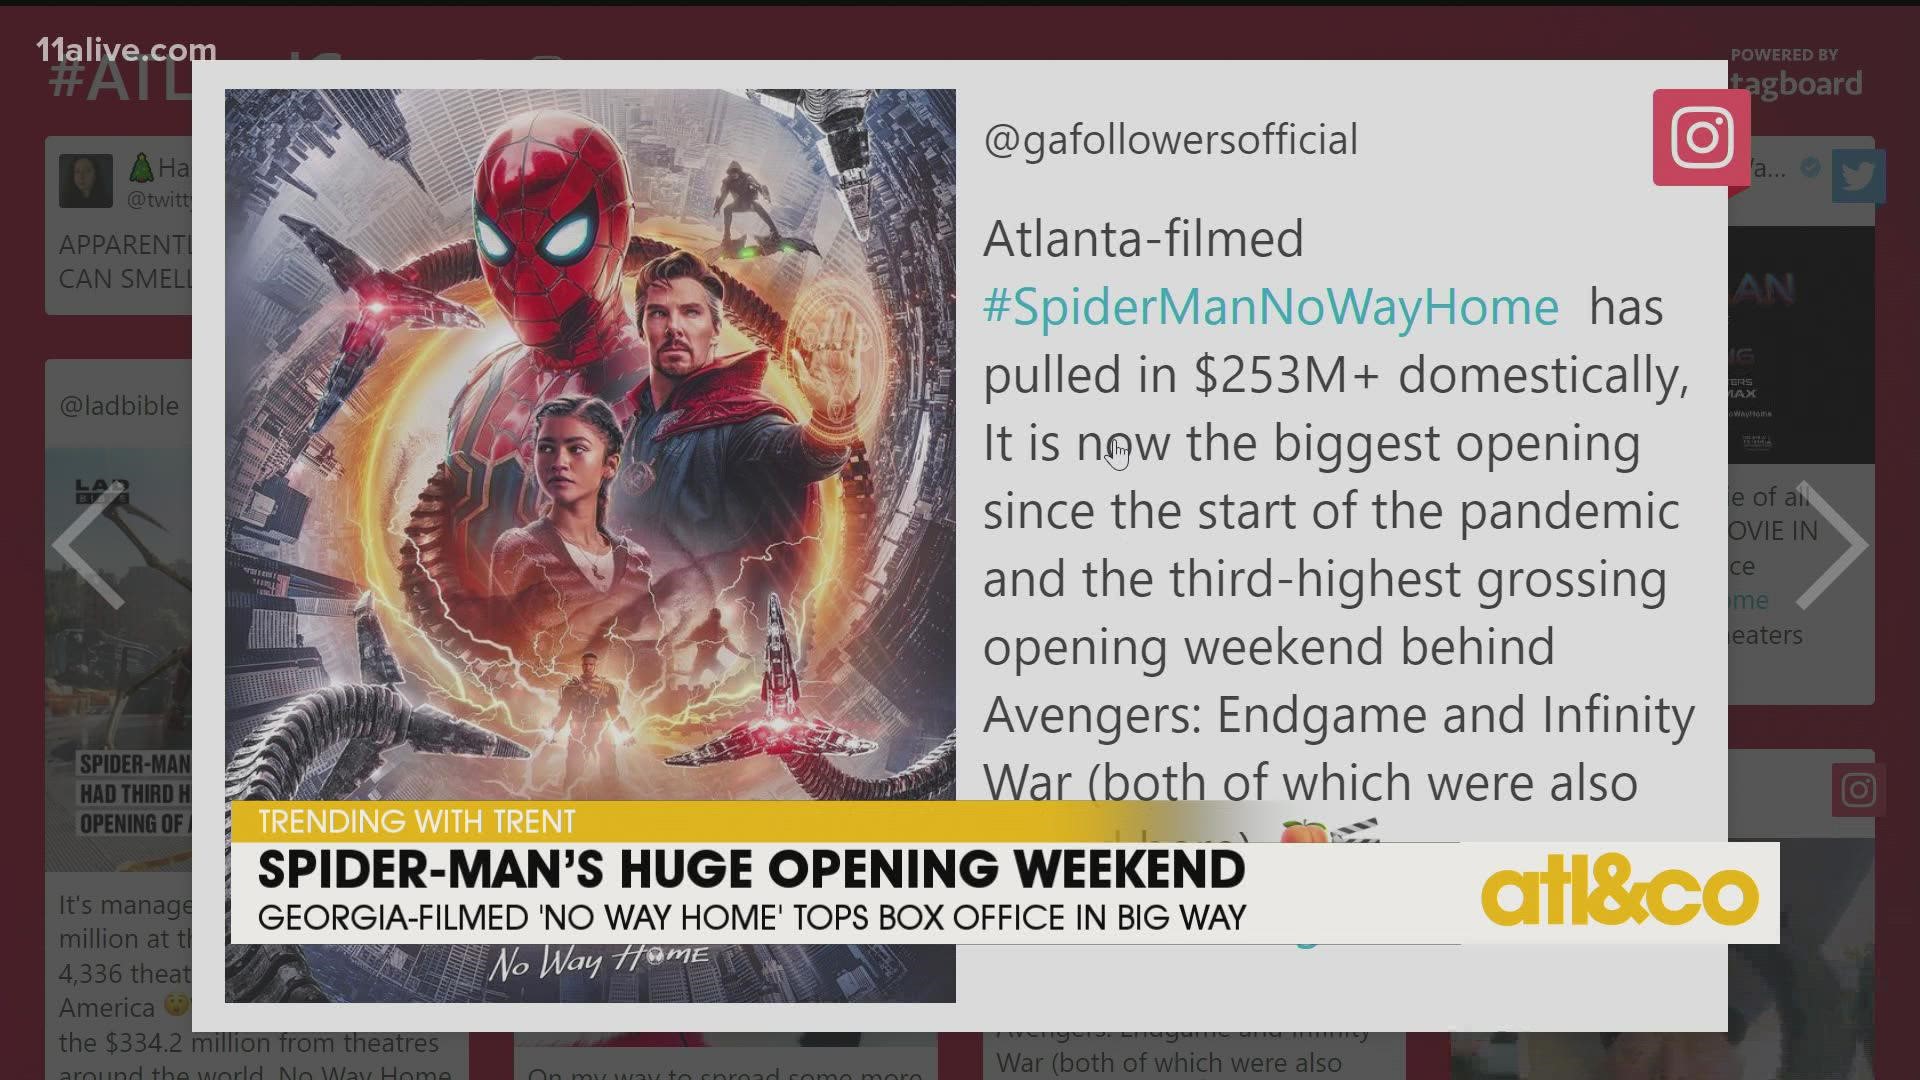 'Spider-Man: No Way Home' raked in huge numbers at the box office, the highest gross since the pandemic hit.